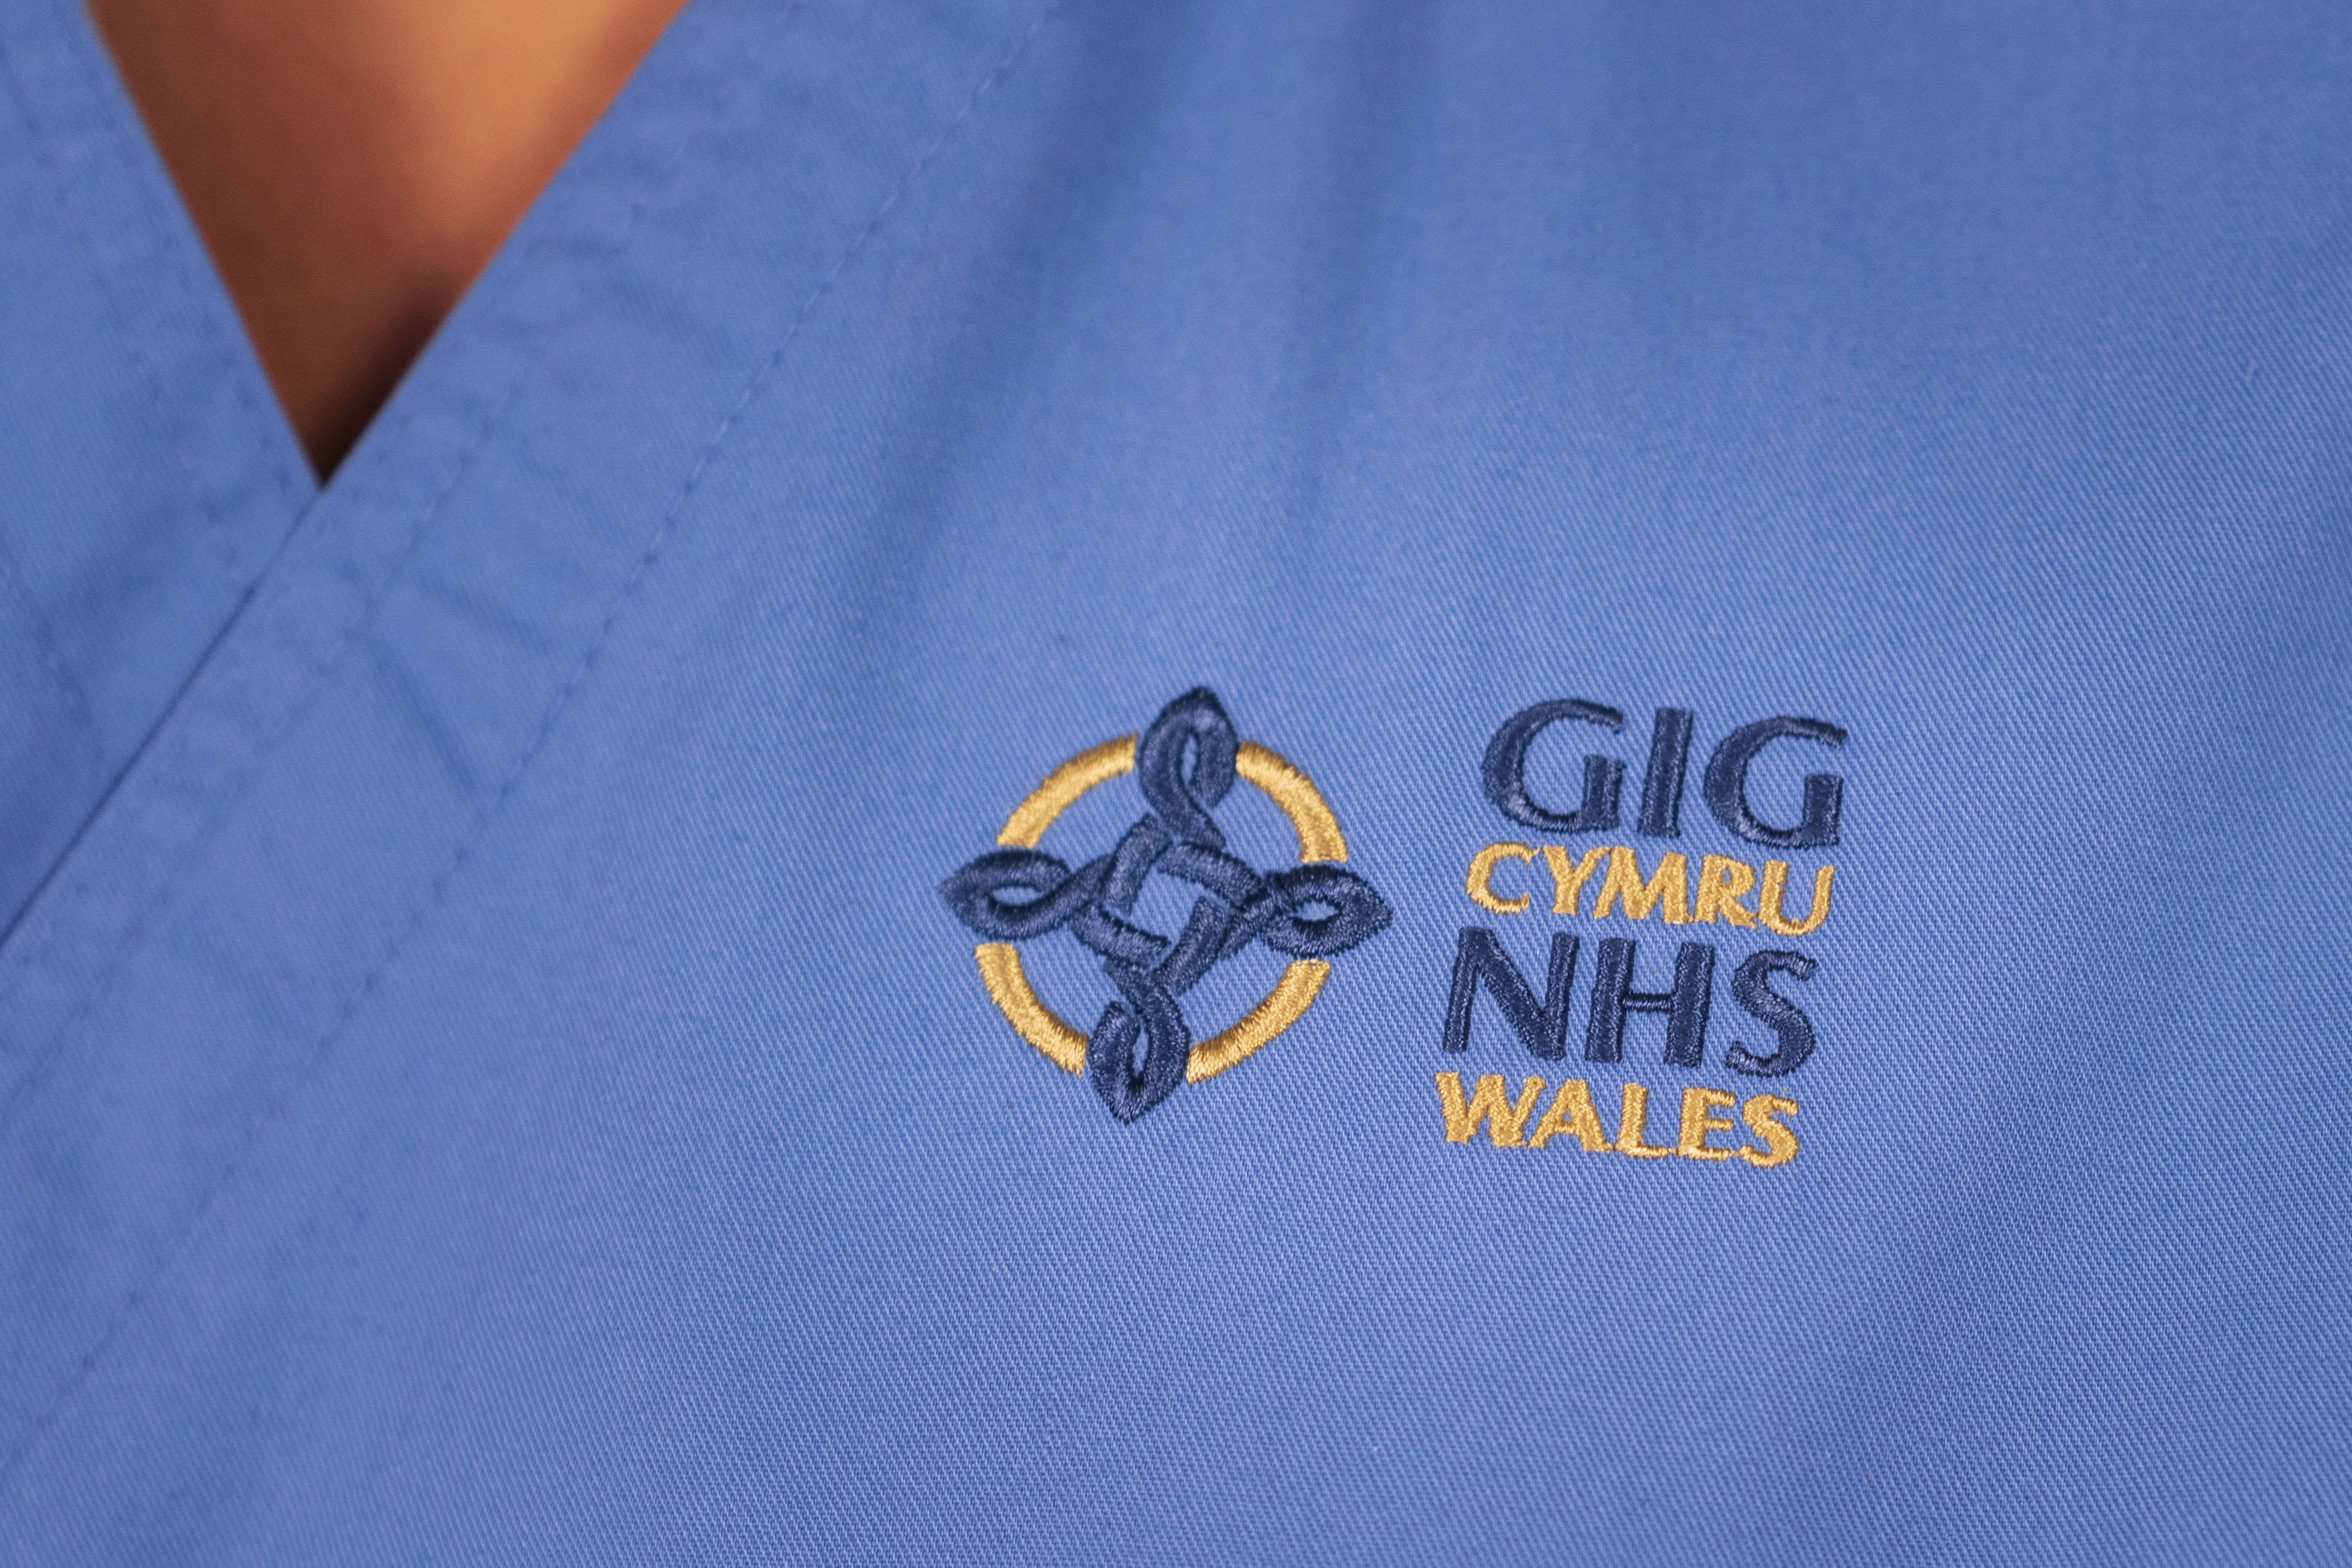 nhs research jobs wales